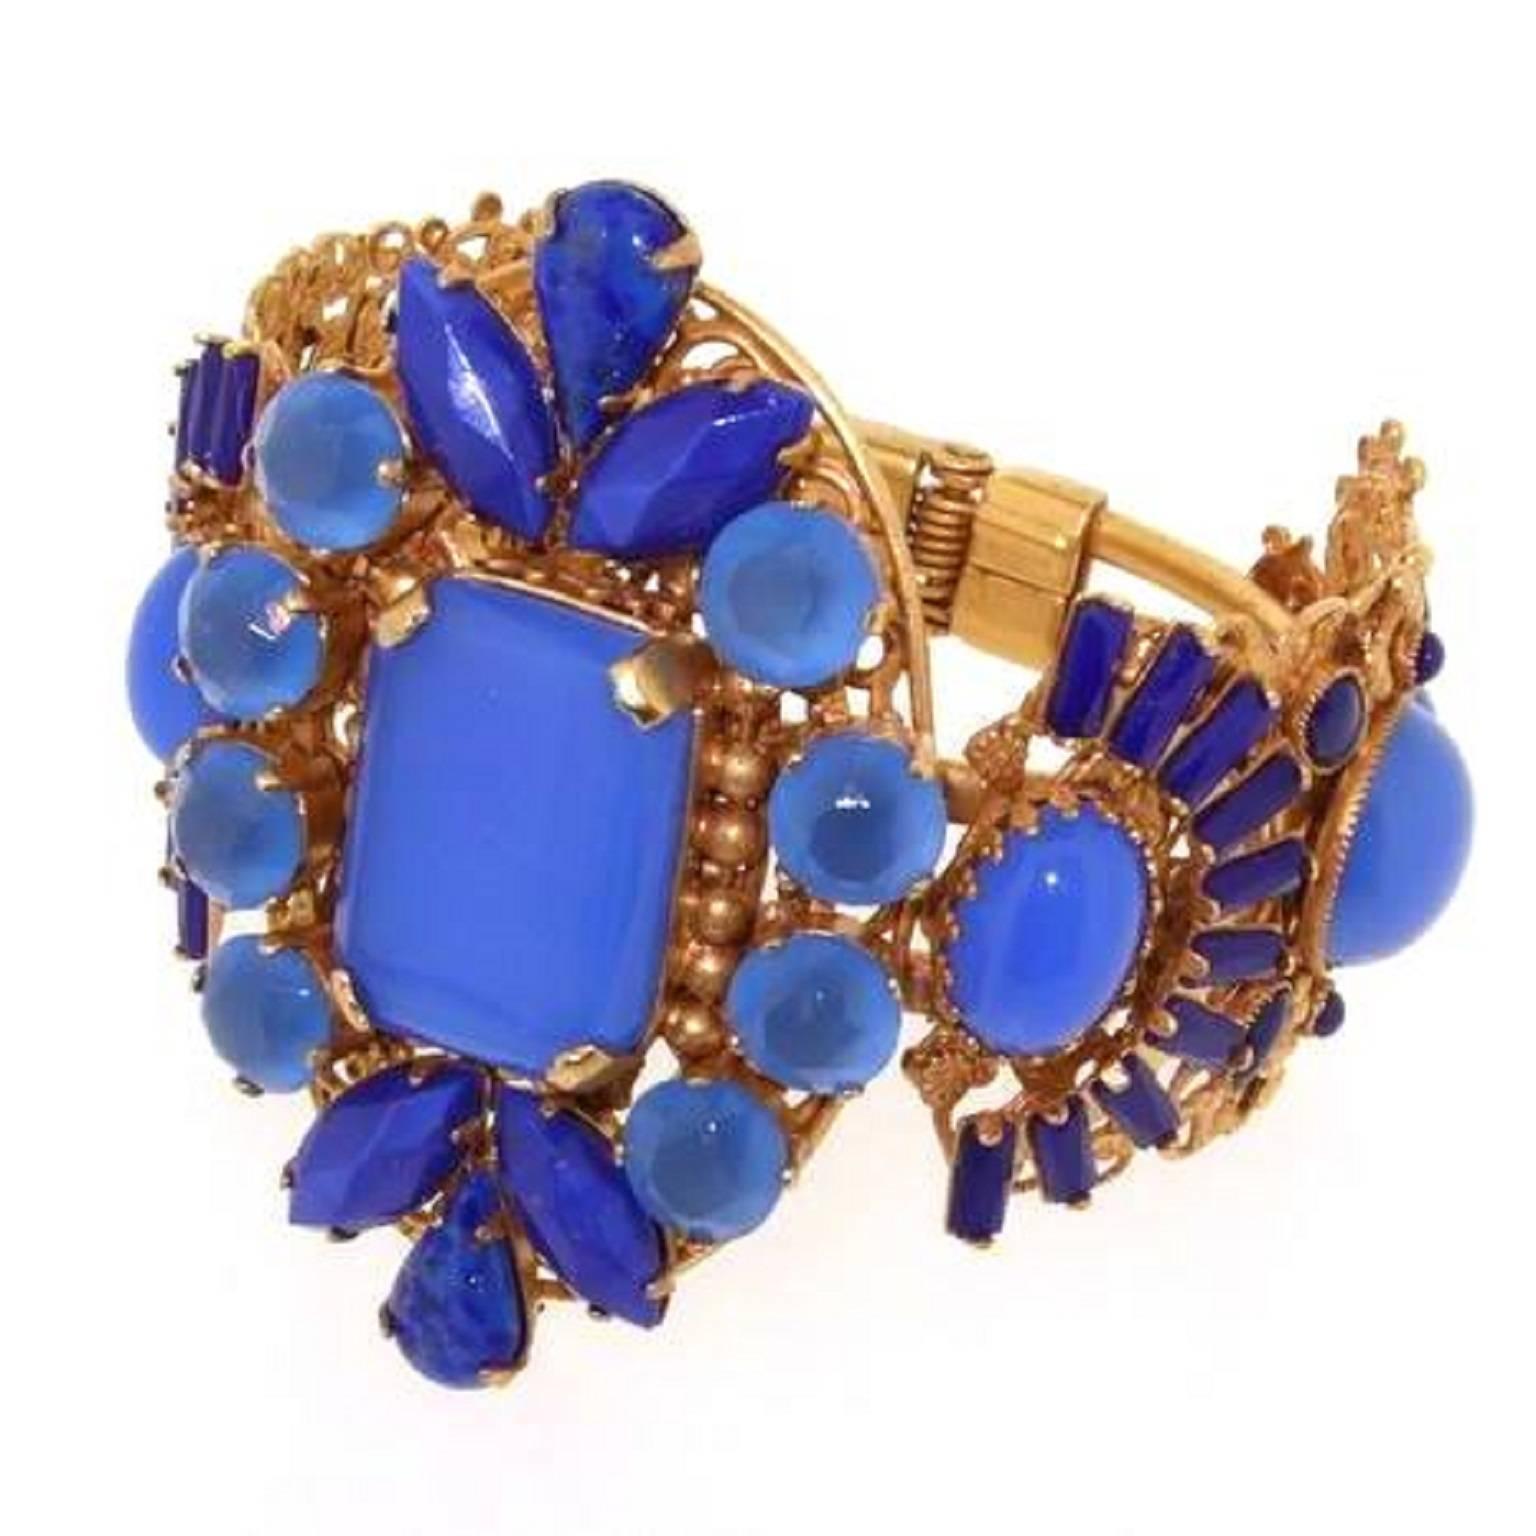 A stunning statement clamper bracelet by Askew London. Nickel free metal, gold plated and set with vintage glass and crystal in lapis, cobalt and corn flower blues. 